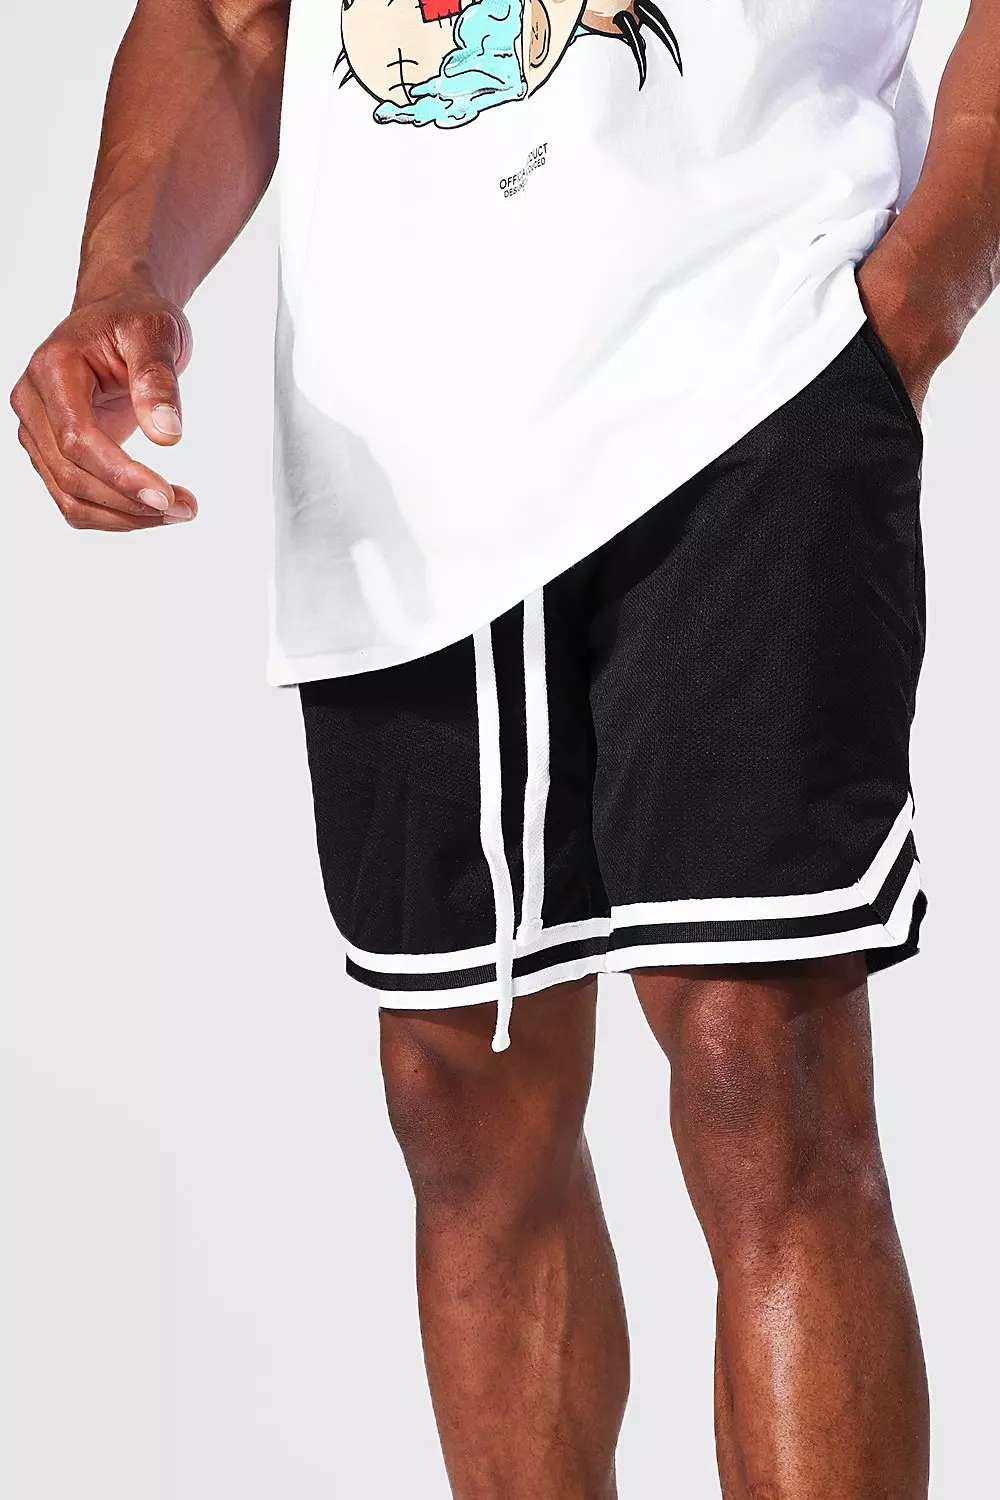 Tall Mesh Basketball Shorts With Tape